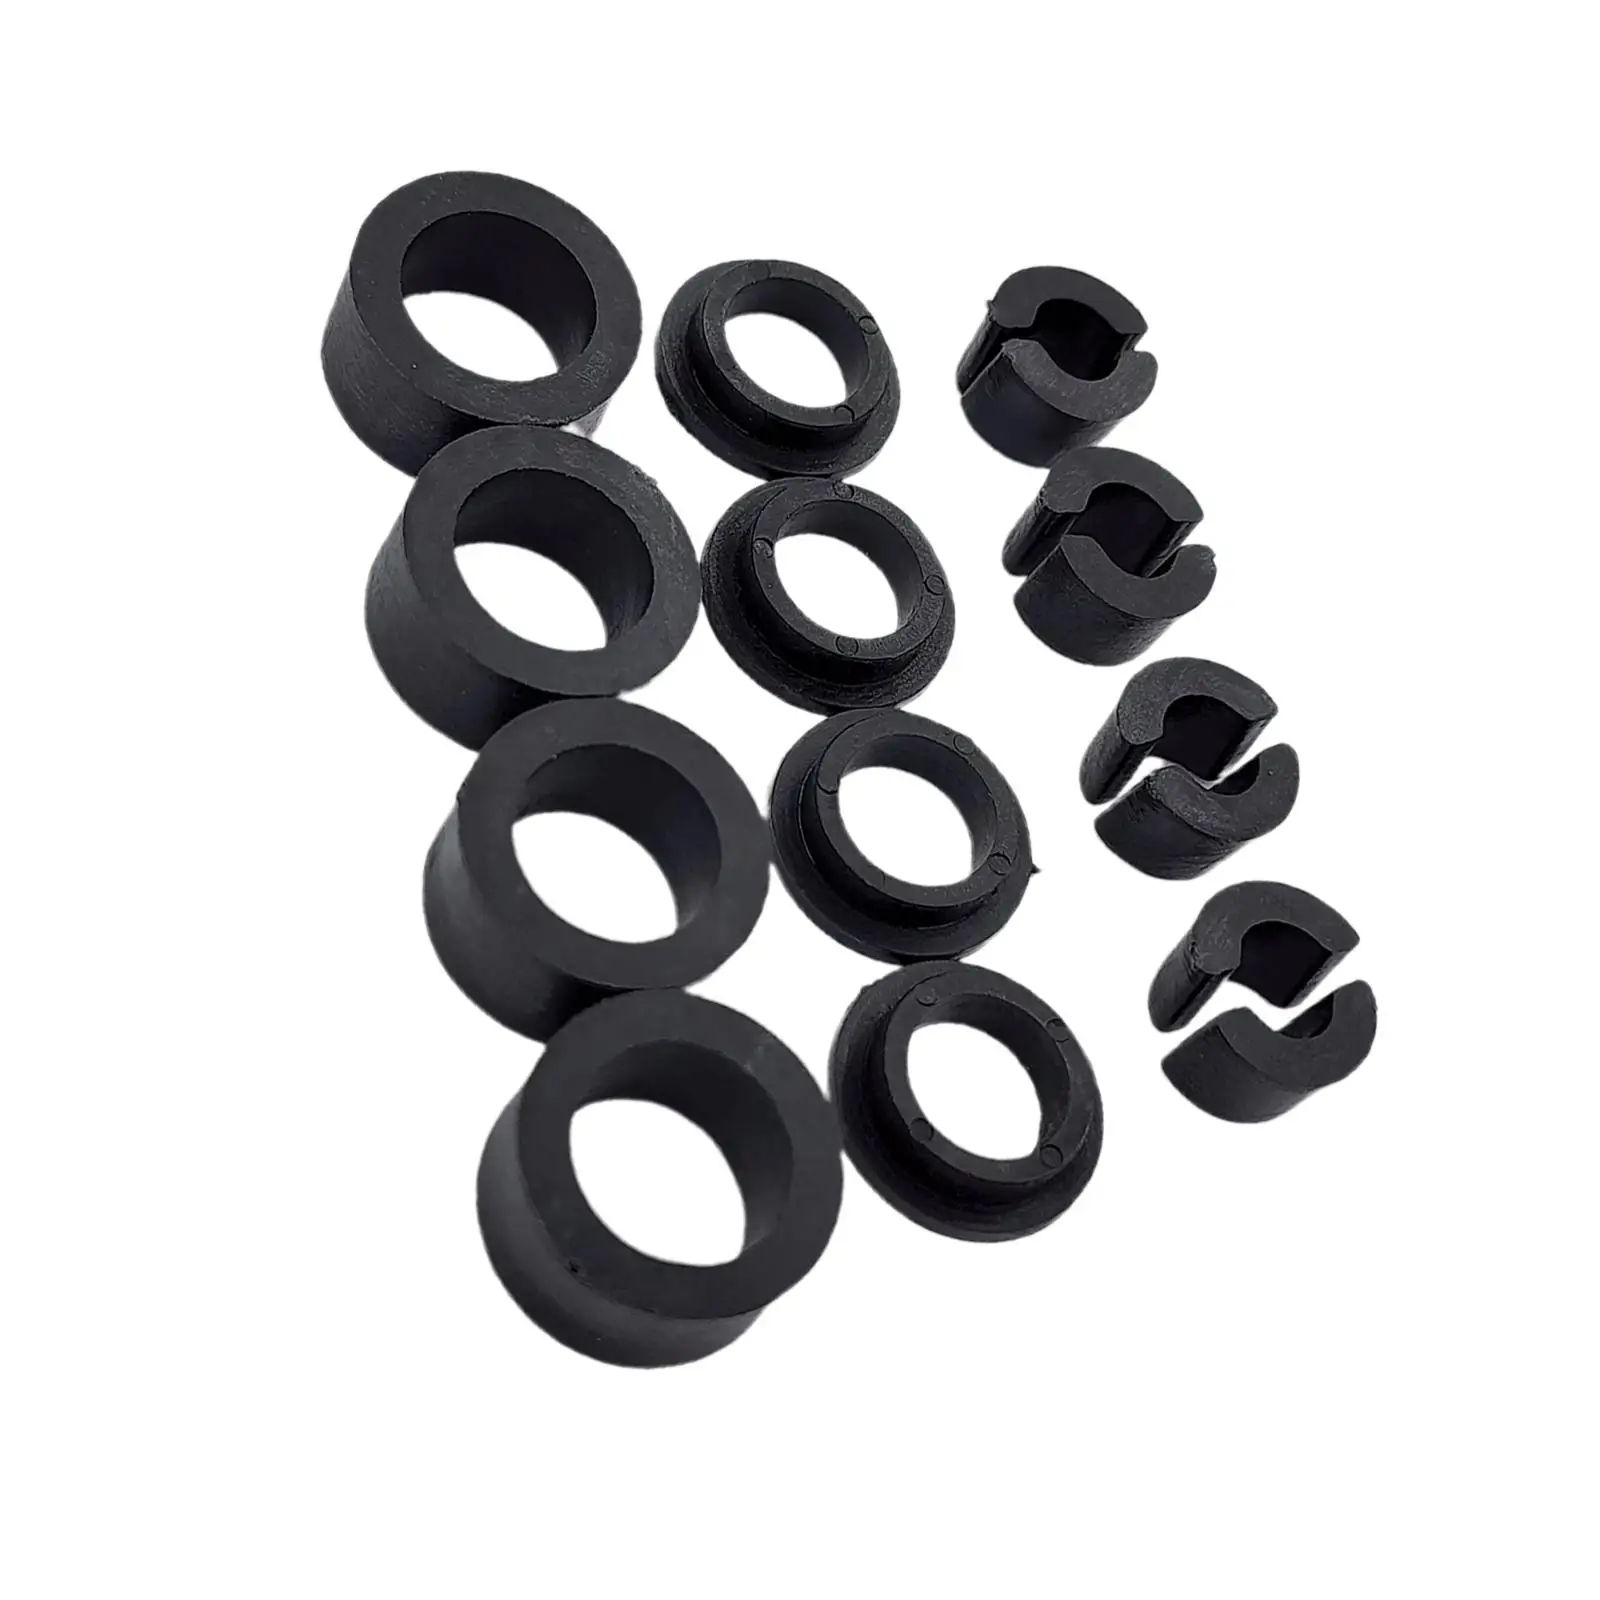 Front Seat Slider Support Bushings Wobbly Loose Seat Fix for TJ Lj 1998-2006 Parts Professional Accessories